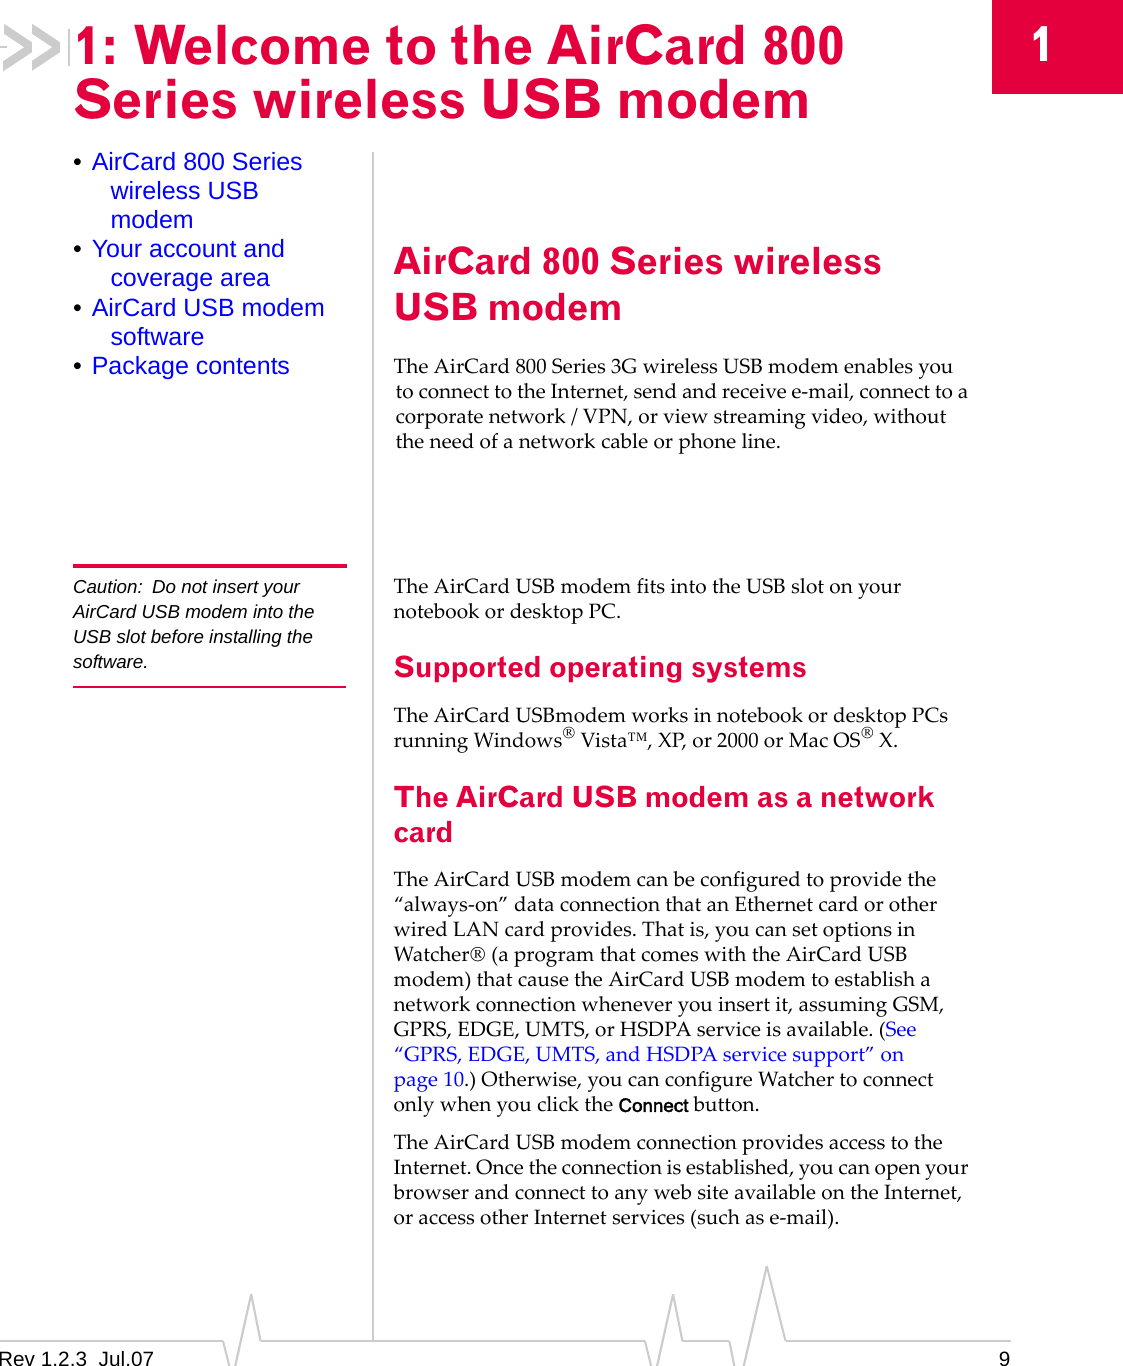 Rev 1.2.3  Jul.07 911: Welcome to the AirCard 800 Series wireless USB modem•AirCard 800 Series wireless USB modem•Your account and coverage area•AirCard USB modem software•Package contentsAirCard 800 Series wireless USB modemTheAirCard 800Series3GwirelessUSBmodemenablesyoutoconnecttotheInternet,sendandreceivee‐mail,connecttoacorporatenetwork/VPN,orviewstreamingvideo,withouttheneedofanetworkcableorphoneline.Caution: Do not insert your AirCard USB modem into the USB slot before installing the software.TheAirCardUSBmodemfitsintotheUSBslotonyournotebookordesktopPC.Supported operating systemsTheAirCardUSBmodemworksinnotebookordesktopPCsrunningWindows®Vista™,XP,or2000orMacOS®X.The AirCard USB modem as a network cardTheAirCardUSBmodemcanbeconfiguredtoprovidethe“always‐on”dataconnectionthatanEthernetcardorotherwiredLANcardprovides.Thatis,youcansetoptionsinWatcher®(aprogramthatcomeswiththeAirCardUSBmodem)thatcausetheAirCardUSBmodemtoestablishanetworkconnectionwheneveryouinsertit,assumingGSM,GPRS,EDGE,UMTS,orHSDPAserviceisavailable.(See“GPRS,EDGE,UMTS,andHSDPAservicesupport”onpage 10.)Otherwise,youcanconfigureWatchertoconnectonlywhenyouclicktheConnectbutton.TheAirCardUSBmodemconnectionprovidesaccesstotheInternet.Oncetheconnectionisestablished,youcanopenyourbrowserandconnecttoanywebsiteavailableontheInternet,oraccessotherInternetservices(suchase‐mail).